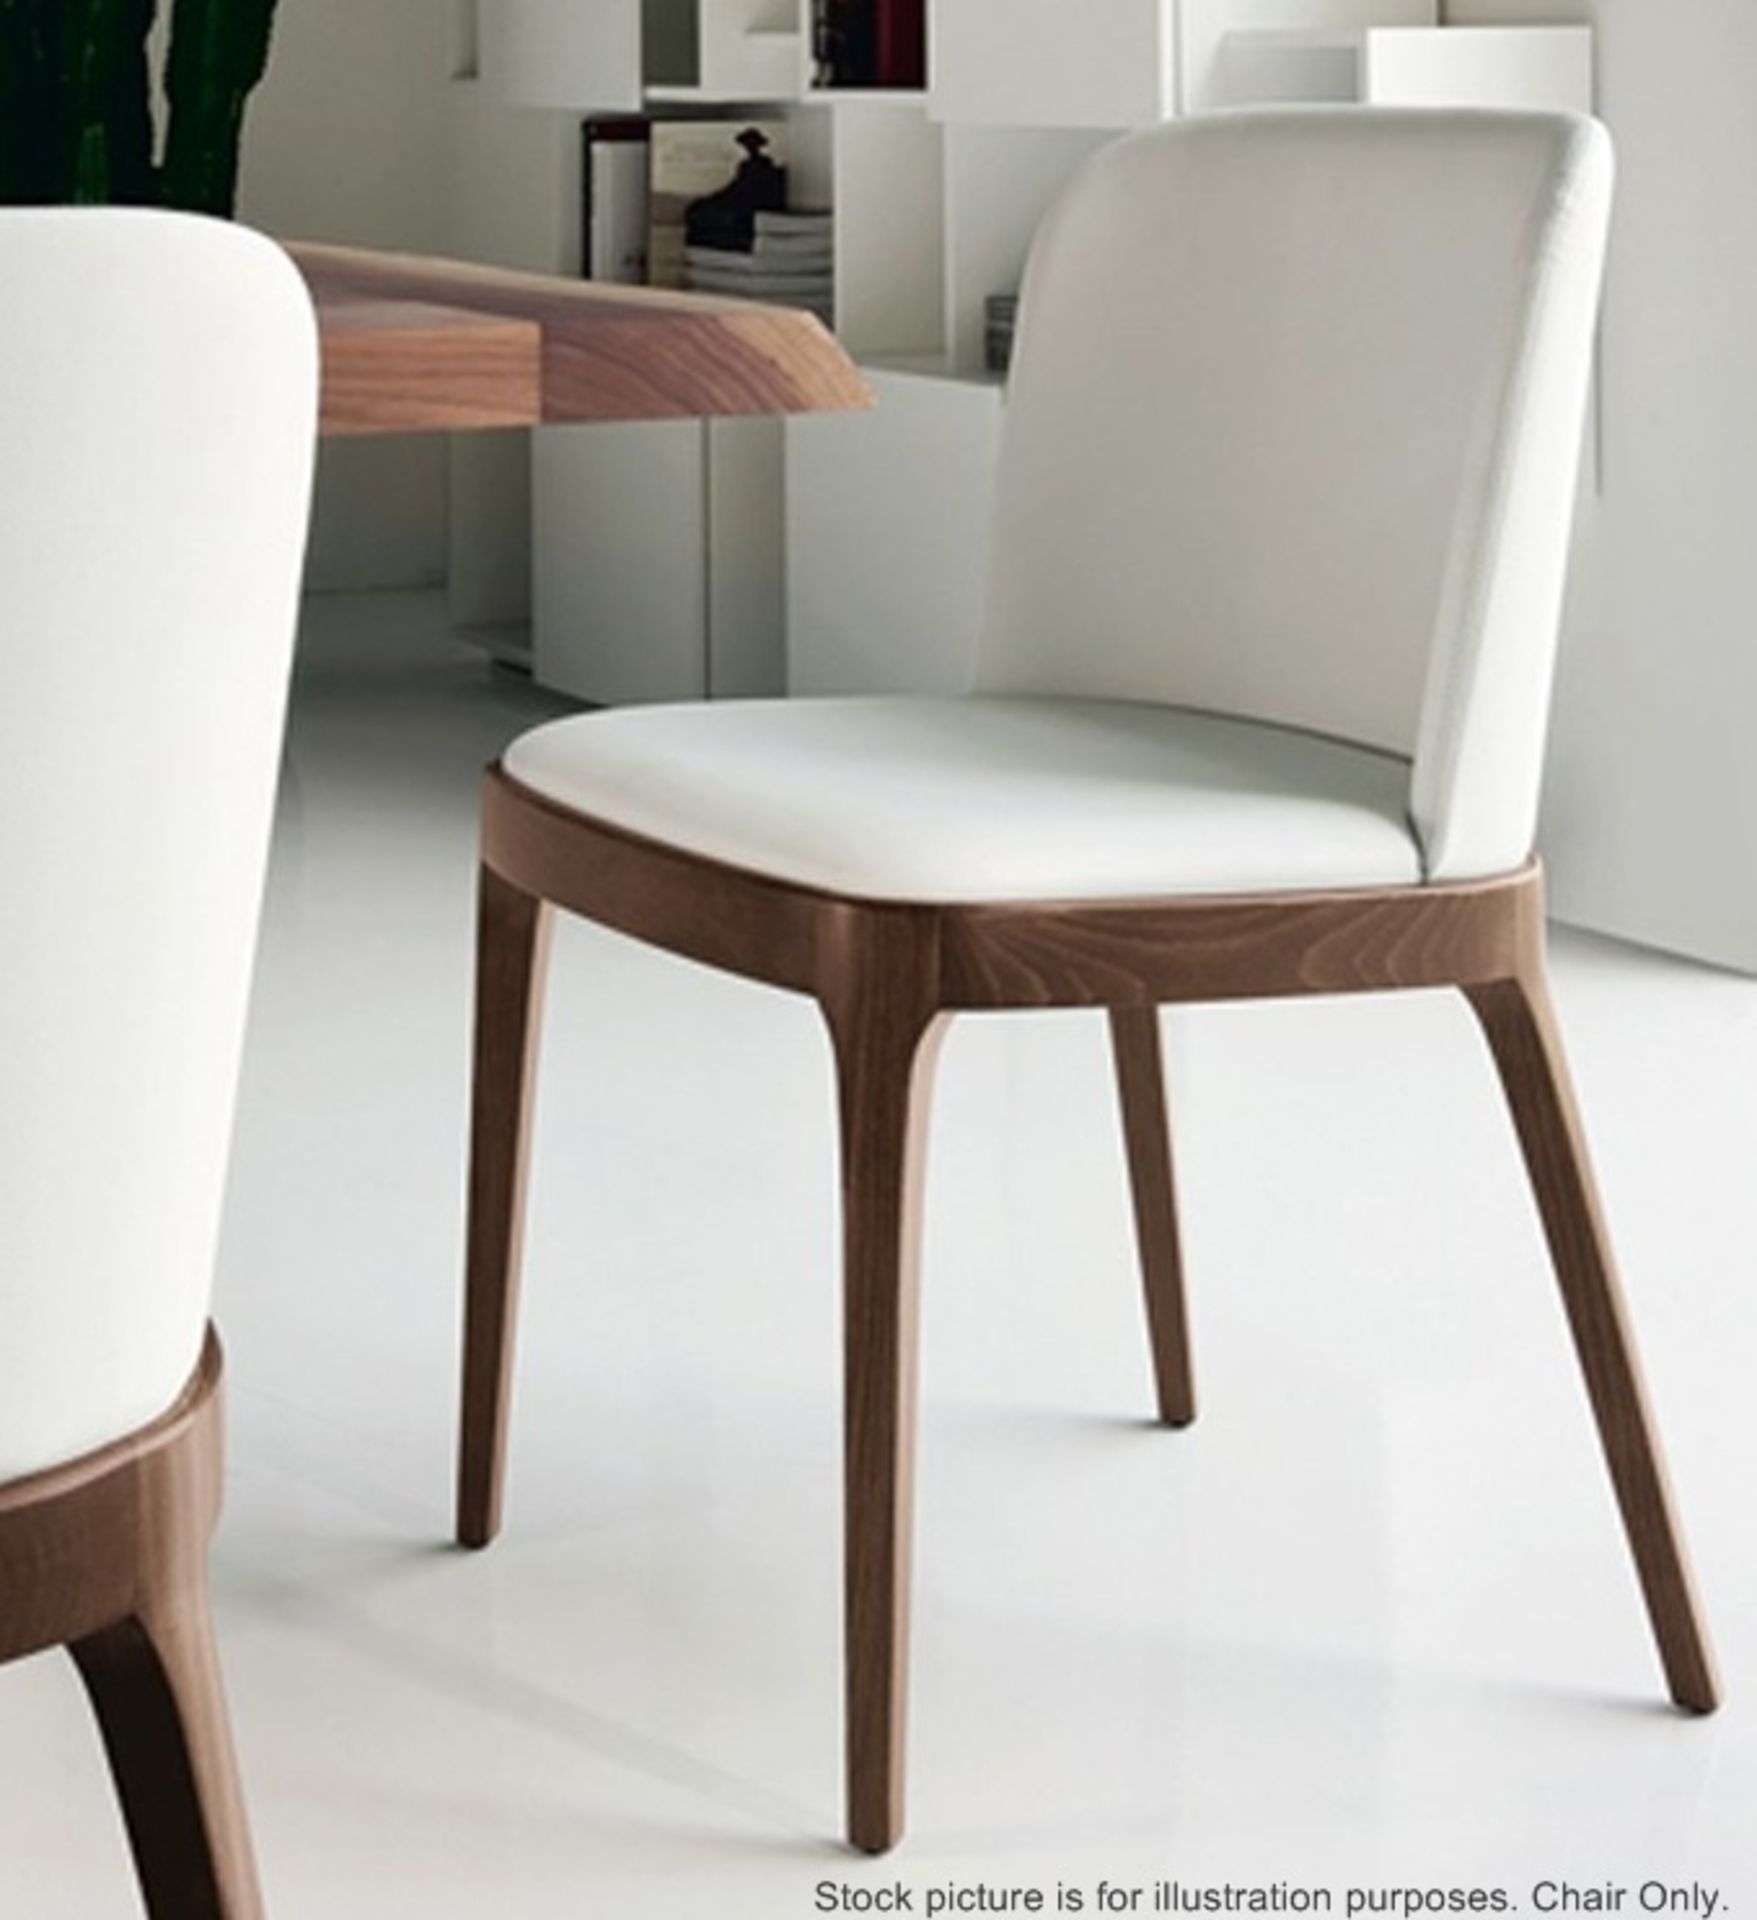 4 x Matching CATTELAN "Magda" Leather & Oak Chairs - Dimensions: w:53 d:55 h:81cm (seat height 48cm)